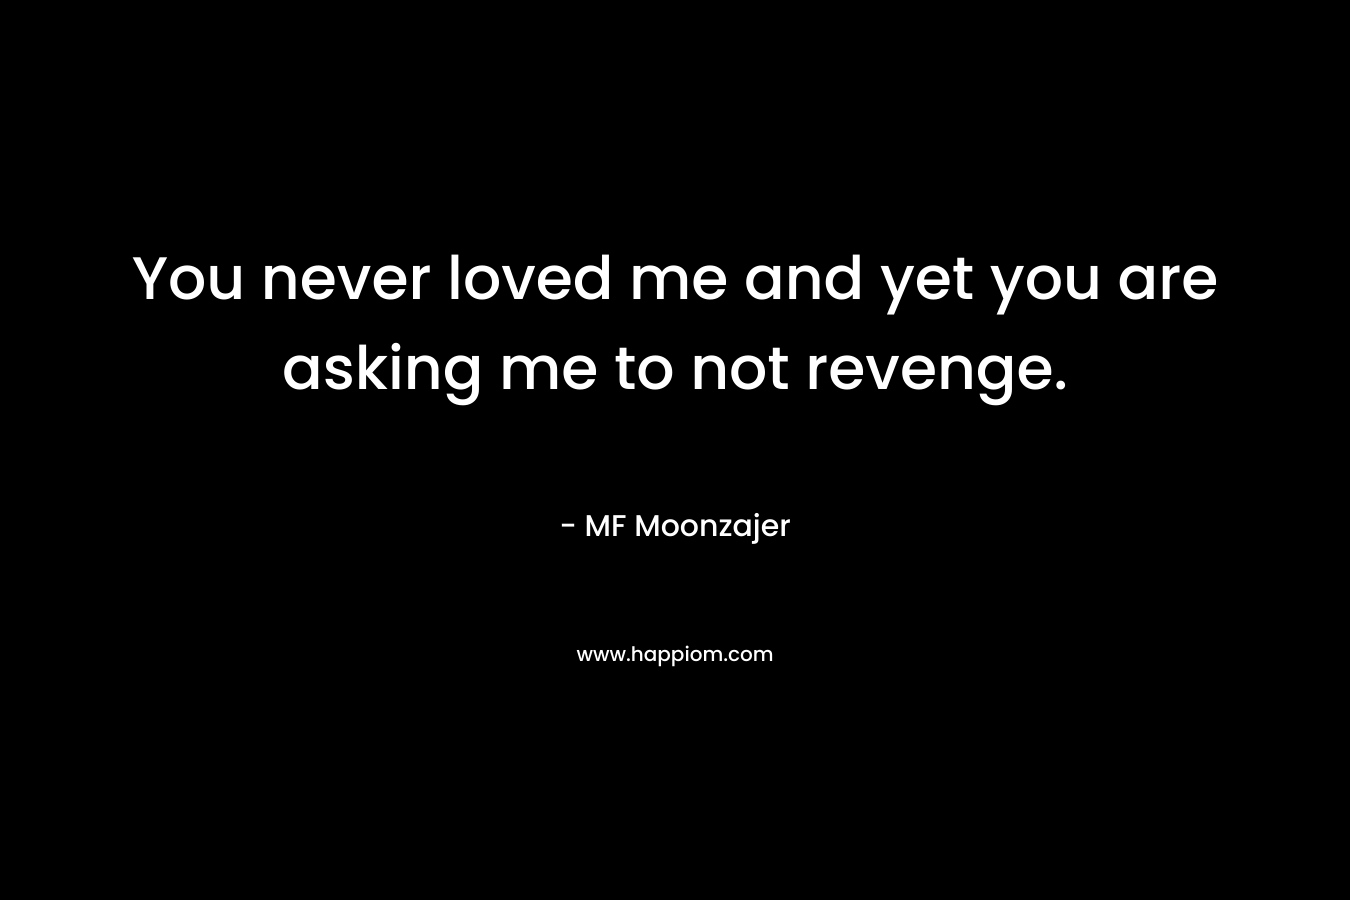 You never loved me and yet you are asking me to not revenge. – MF Moonzajer